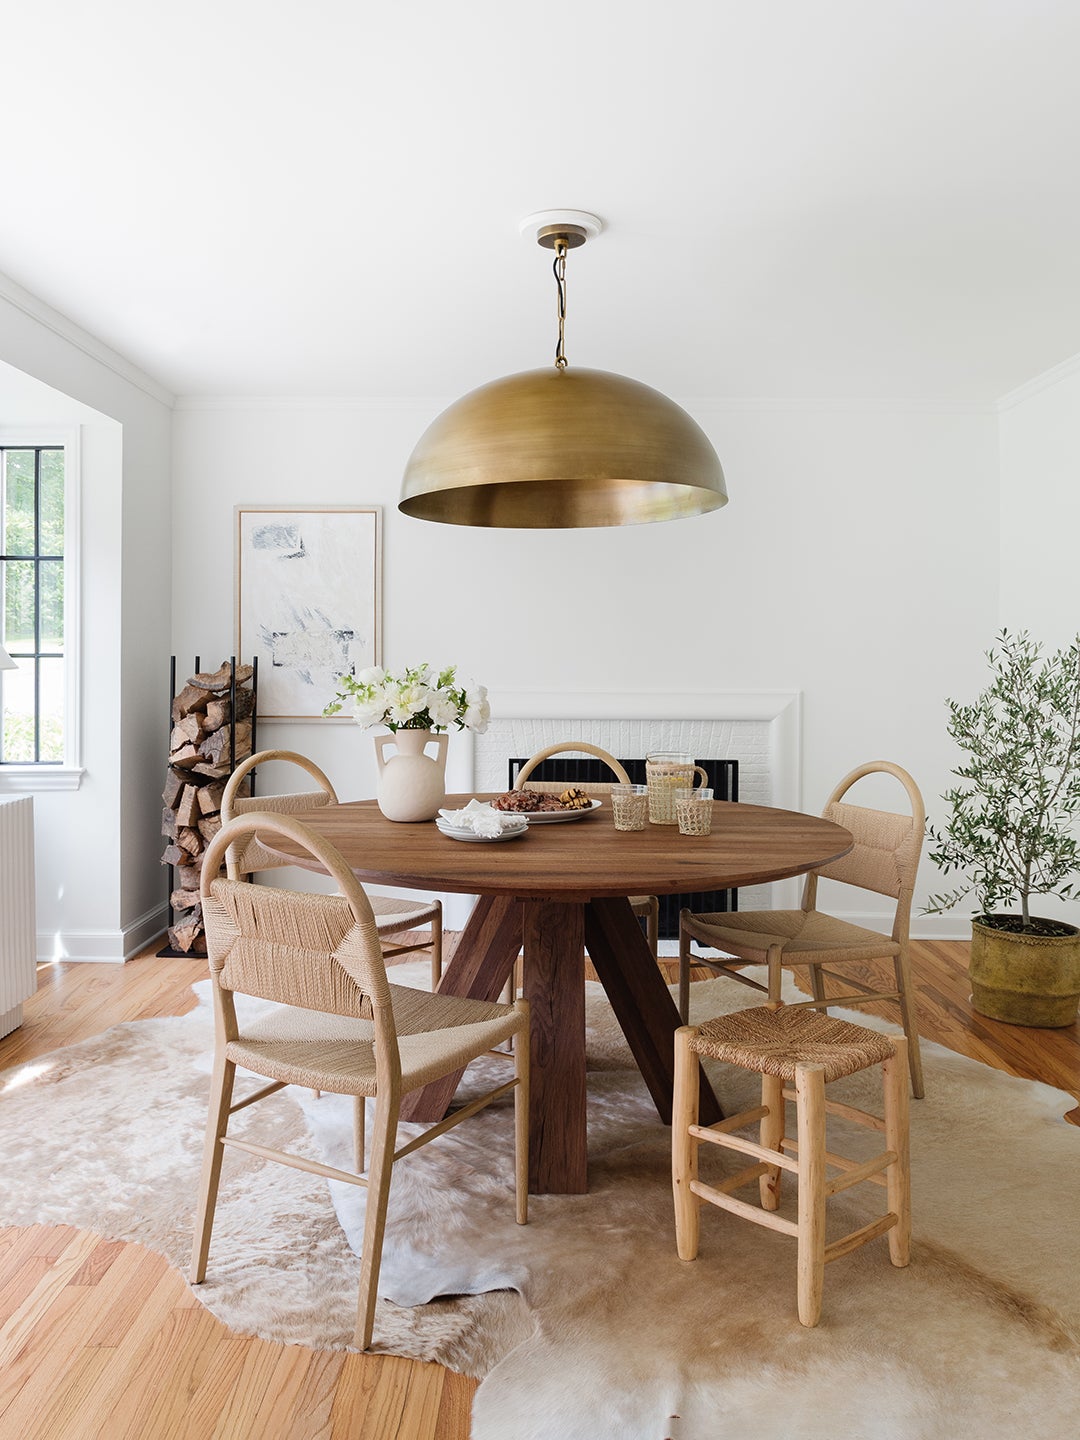 wooden dining table and chairs with brass chandelier